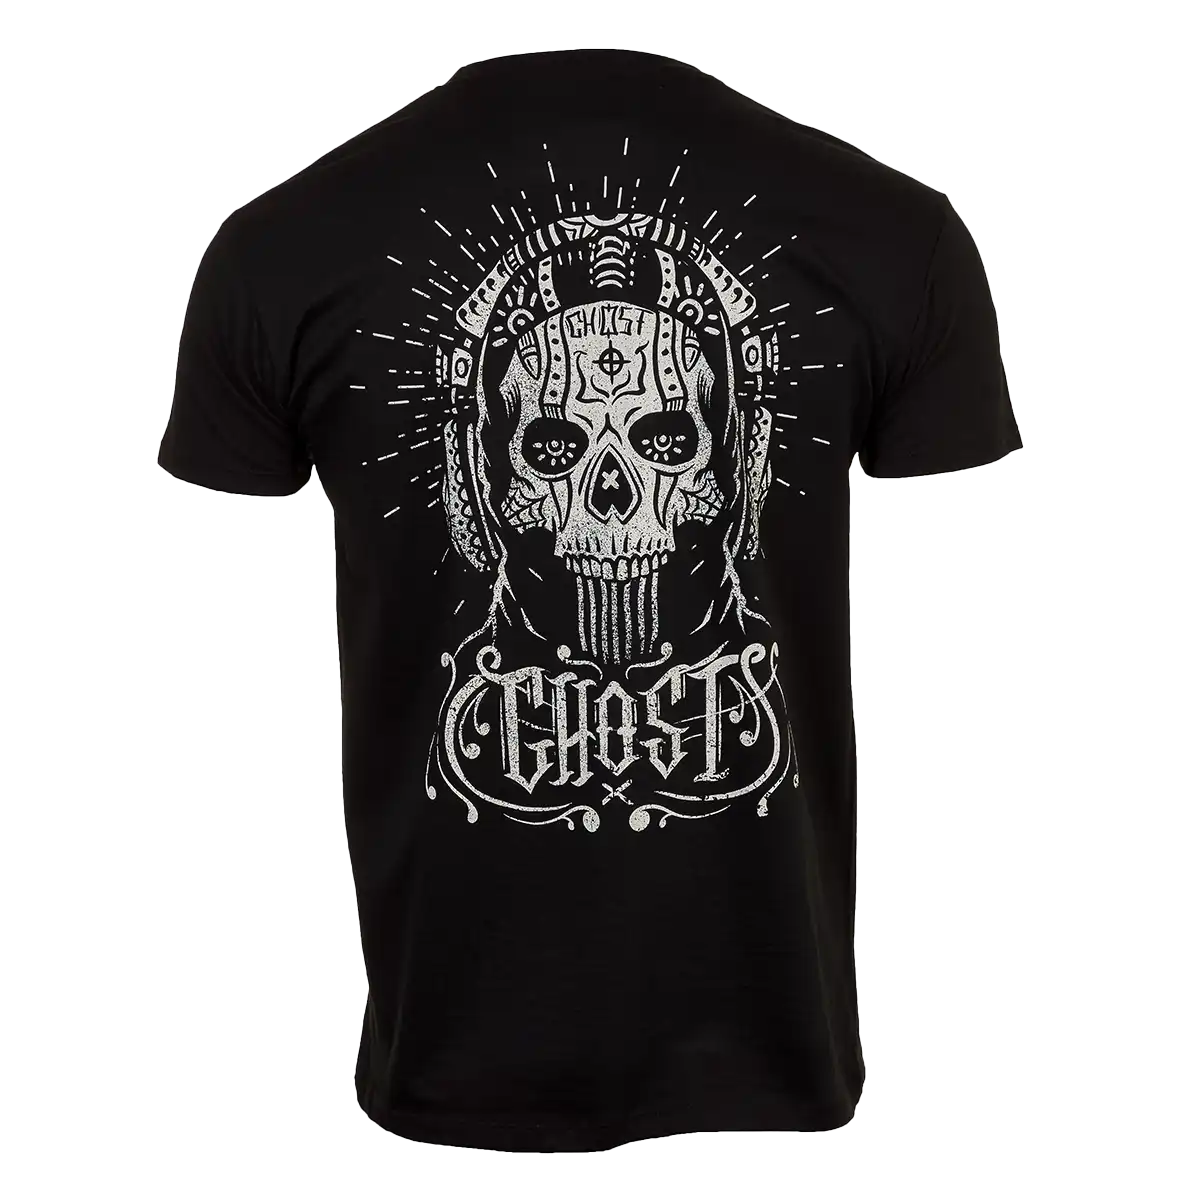 Call of Duty T-Shirt "Ghost" Black S Image 2